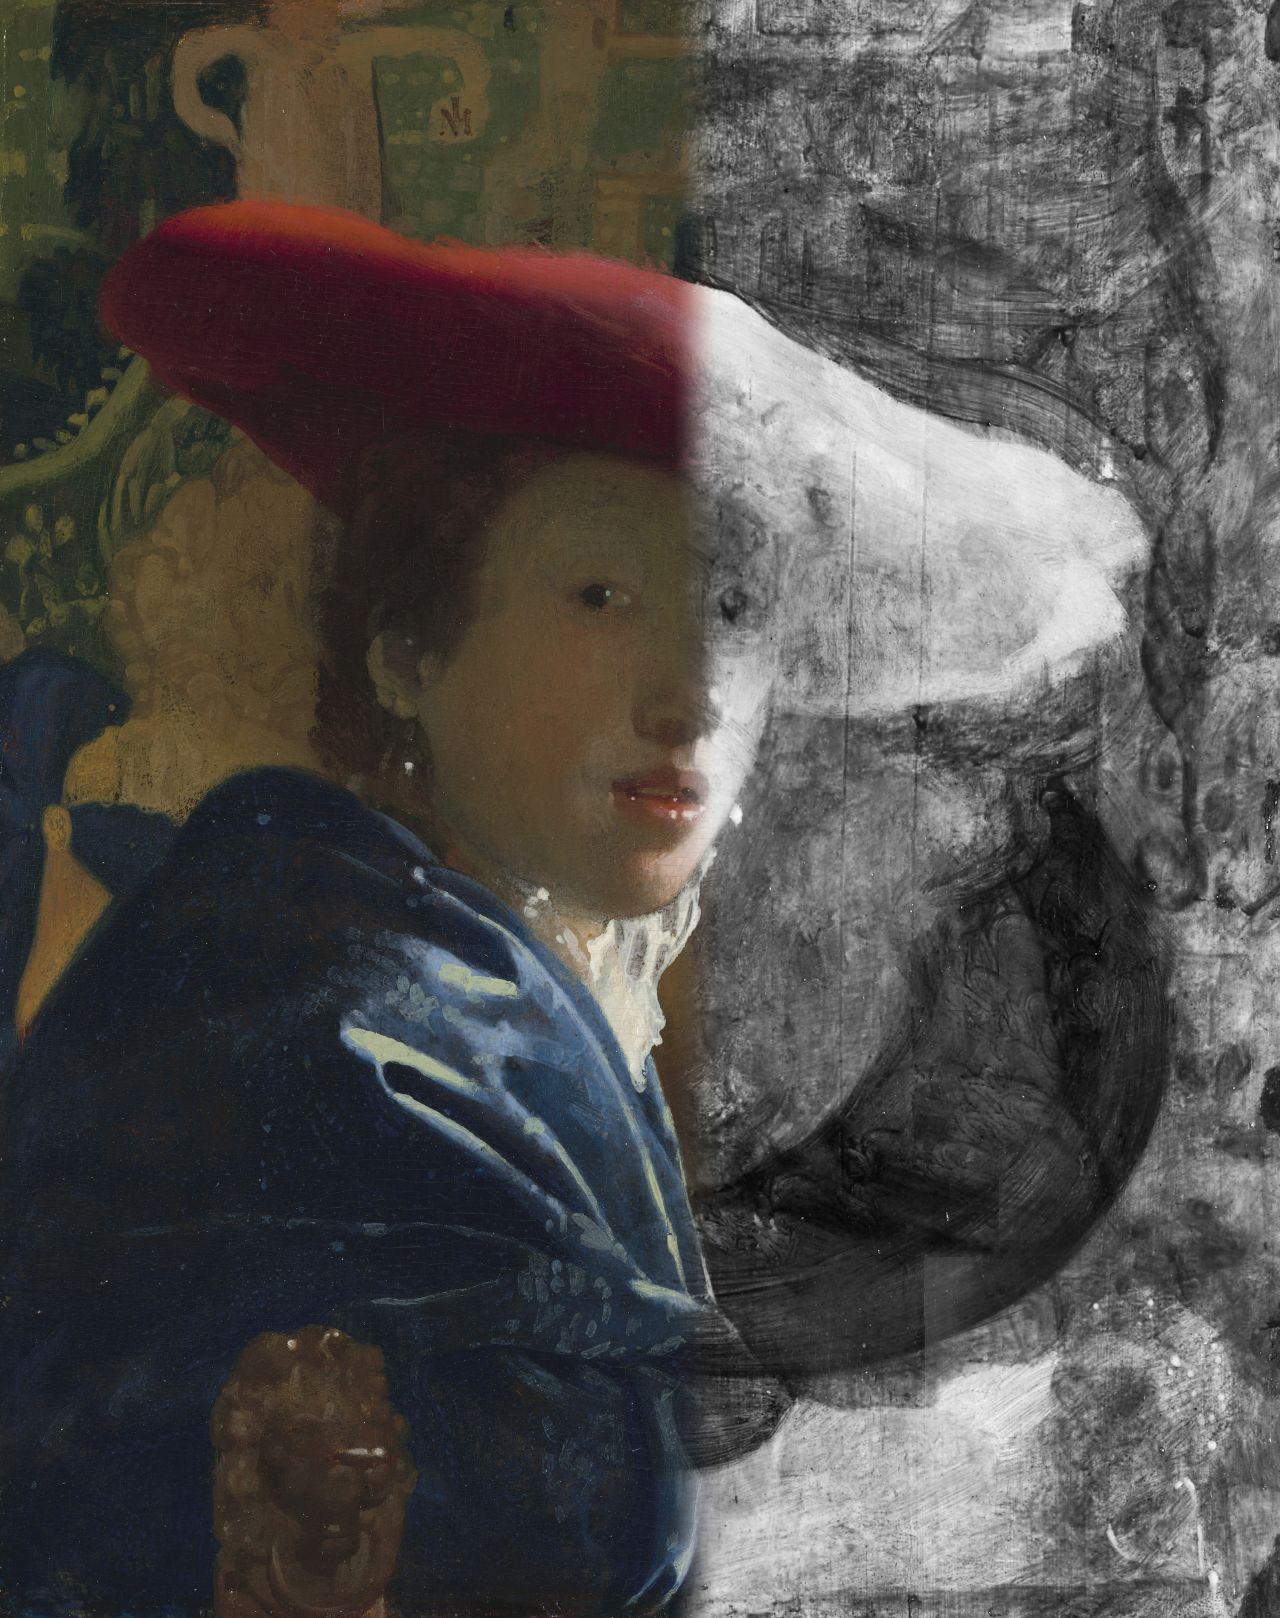 "Girl with the Red Hat" appears to show the same model and was made by Vermeer. Imaging reveals an earlier composition beneath the portrait.